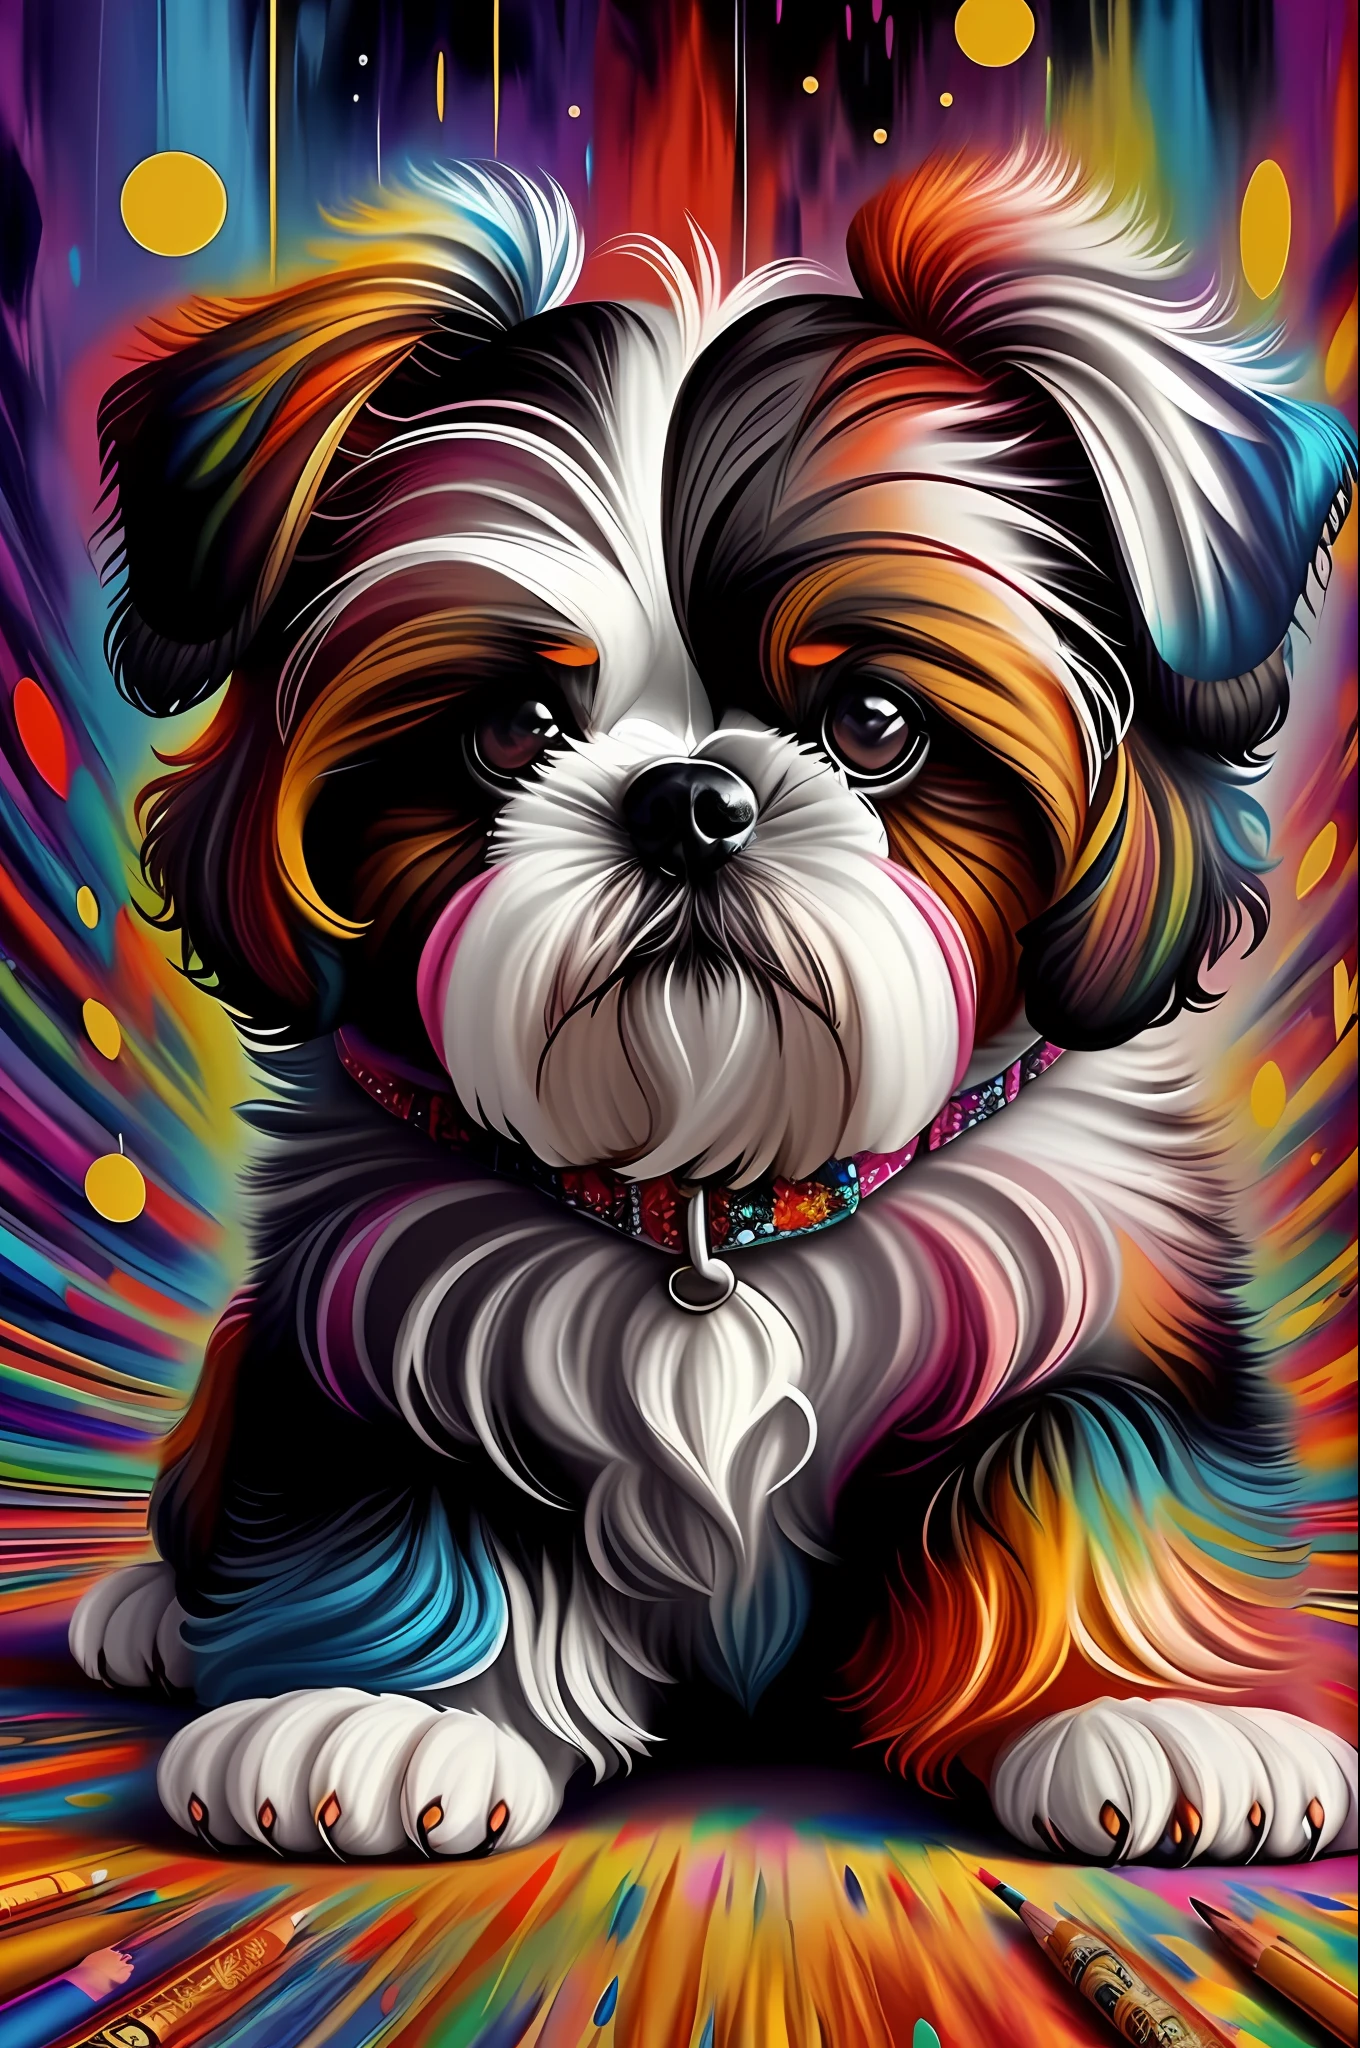 (Dog shih-tzu),  Eduardo Kobra quilting ,multidimensional geometric wall PORTRAIT, artistry, chibi,
yang016k, comely, Colouring,
Primary works, top-quality, best qualityer, offcial art, Beautiful and Aesthetic,